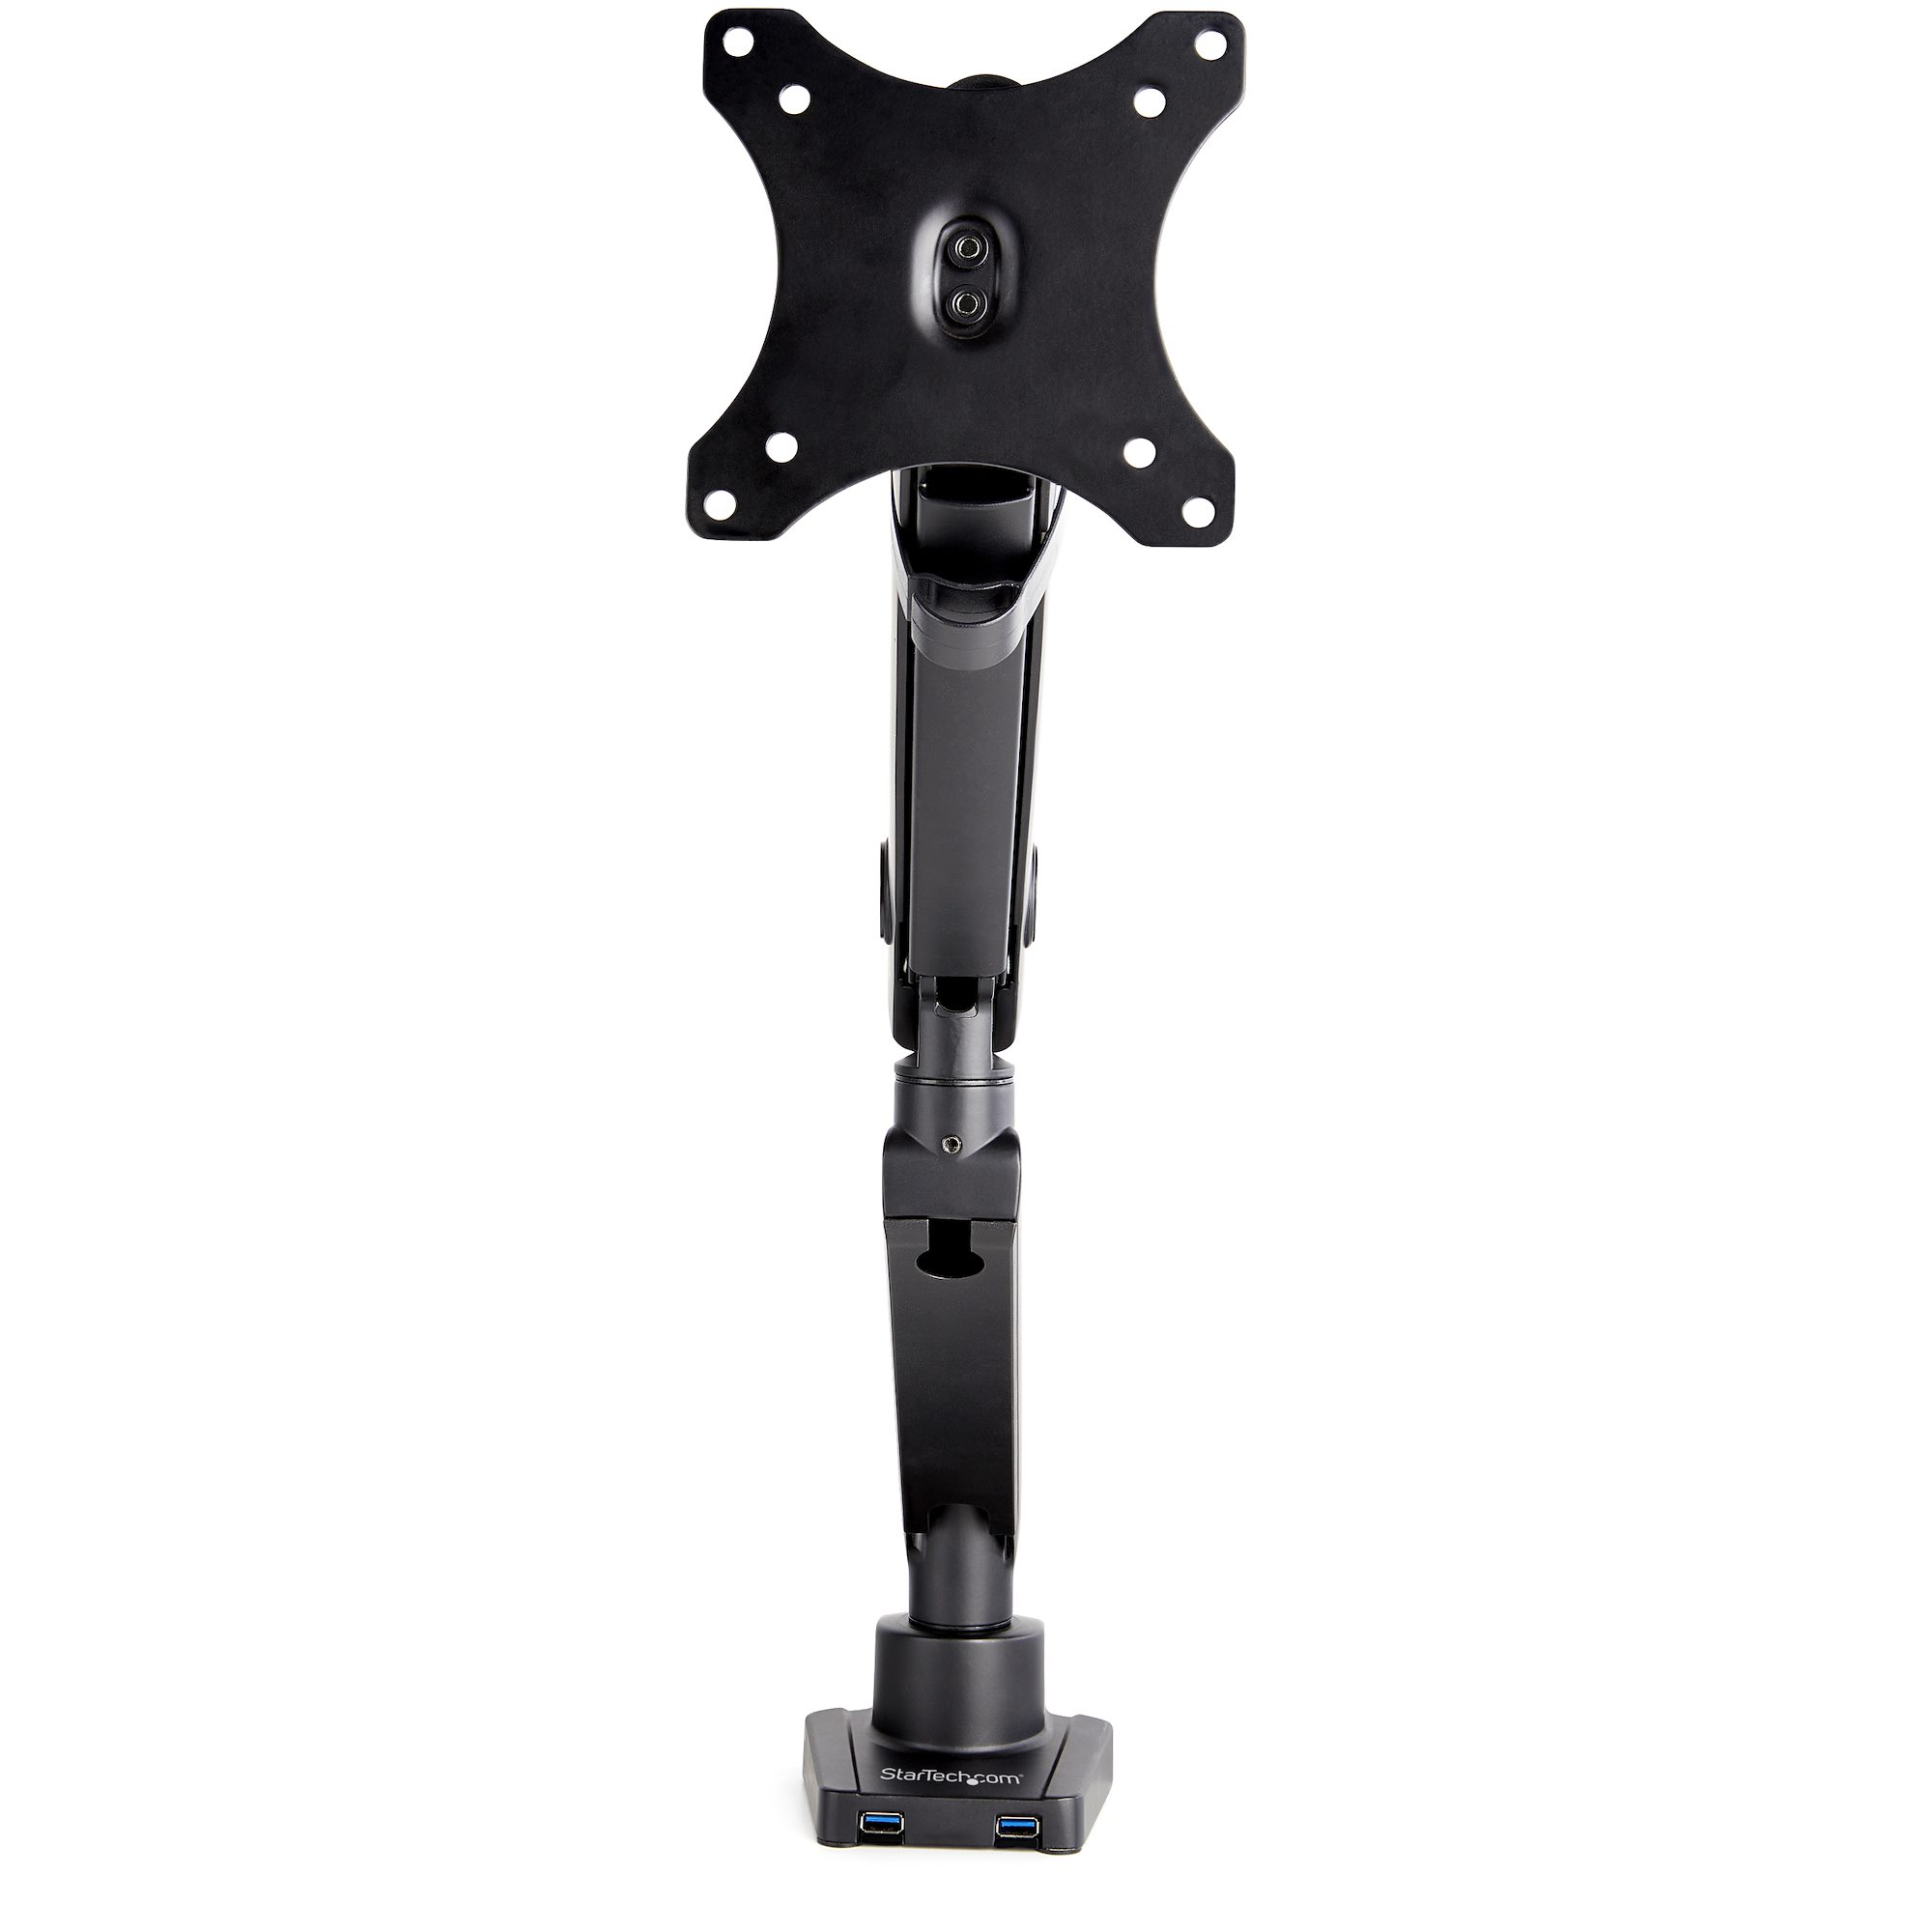 Dual Monitor Mount – Clamp-on Monitor Arm With 2 Adjustable Vesa Mounts –  Black – Stand Steady : Target